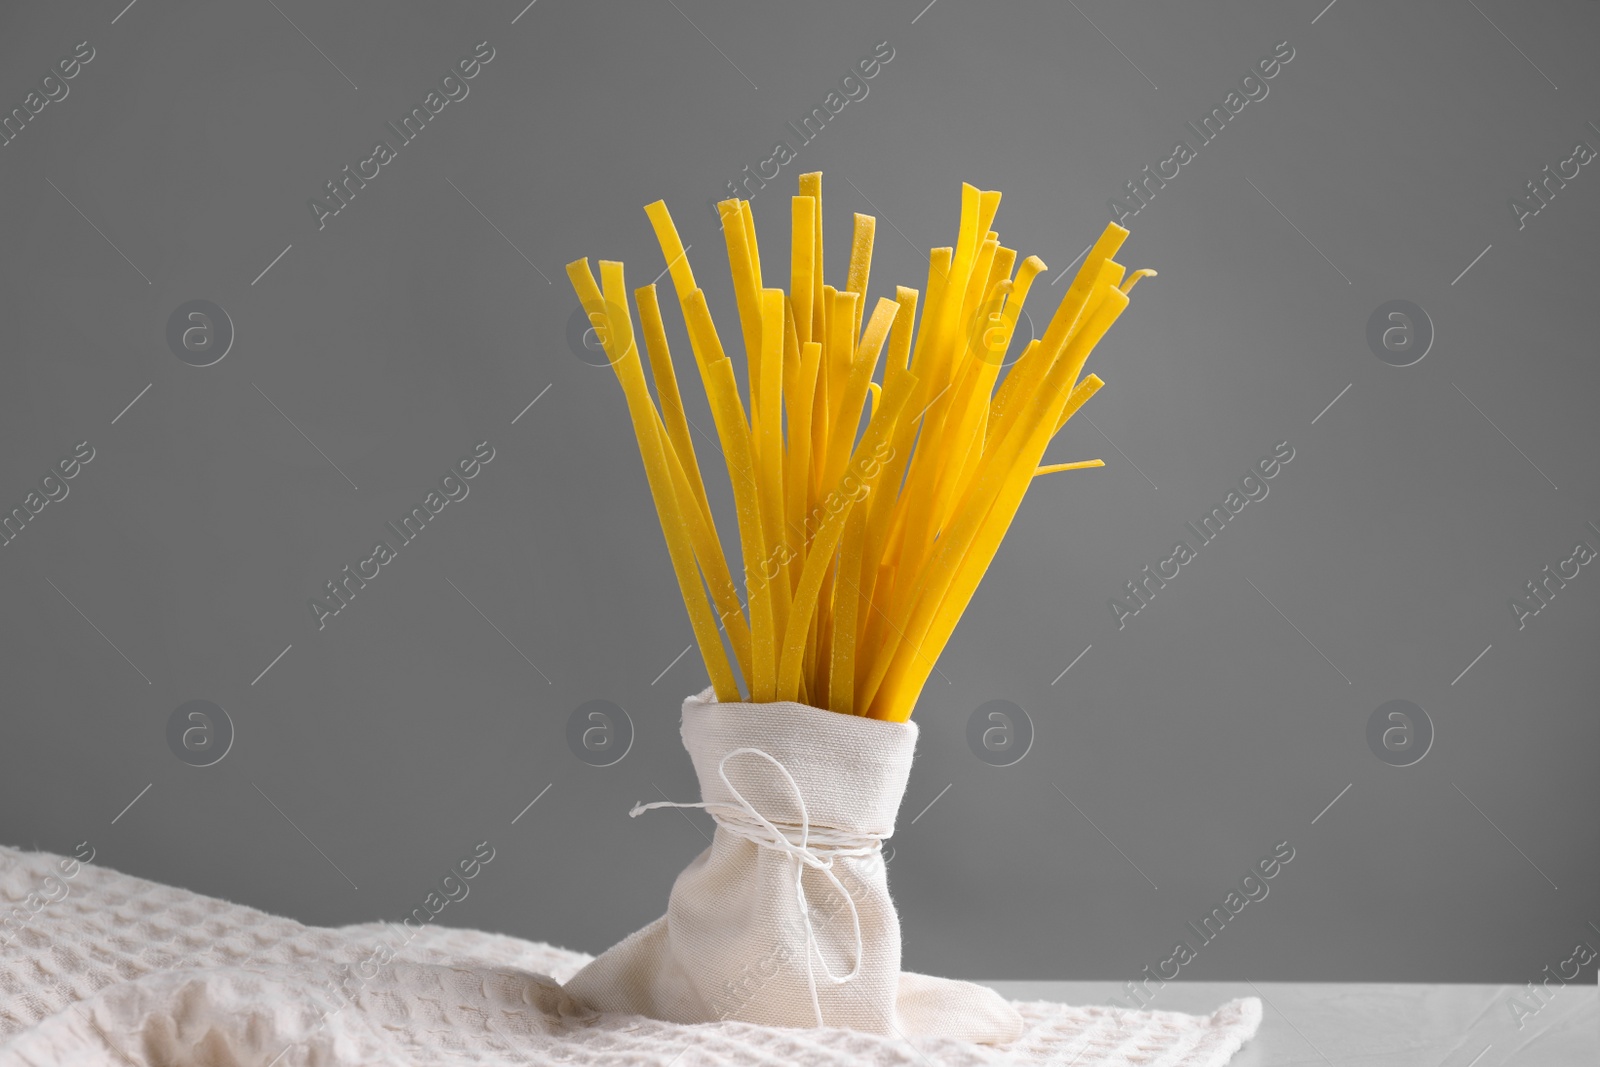 Photo of Uncooked noodles on table against grey background. Italian pasta